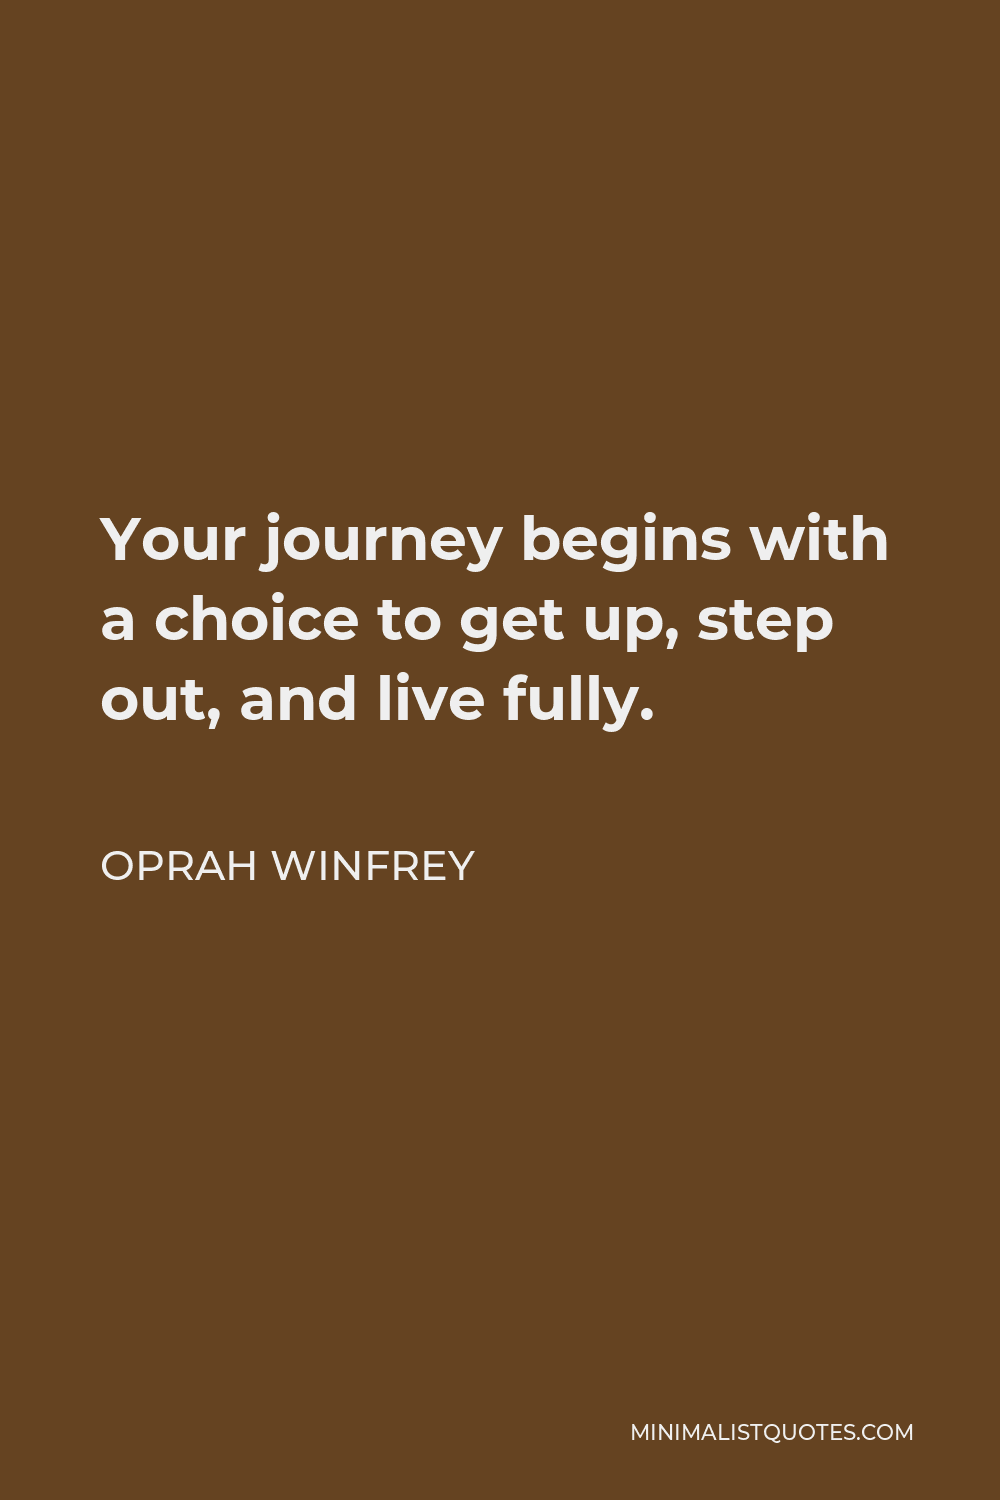 Oprah Winfrey Quote - Your journey begins with a choice to get up, step out, and live fully.